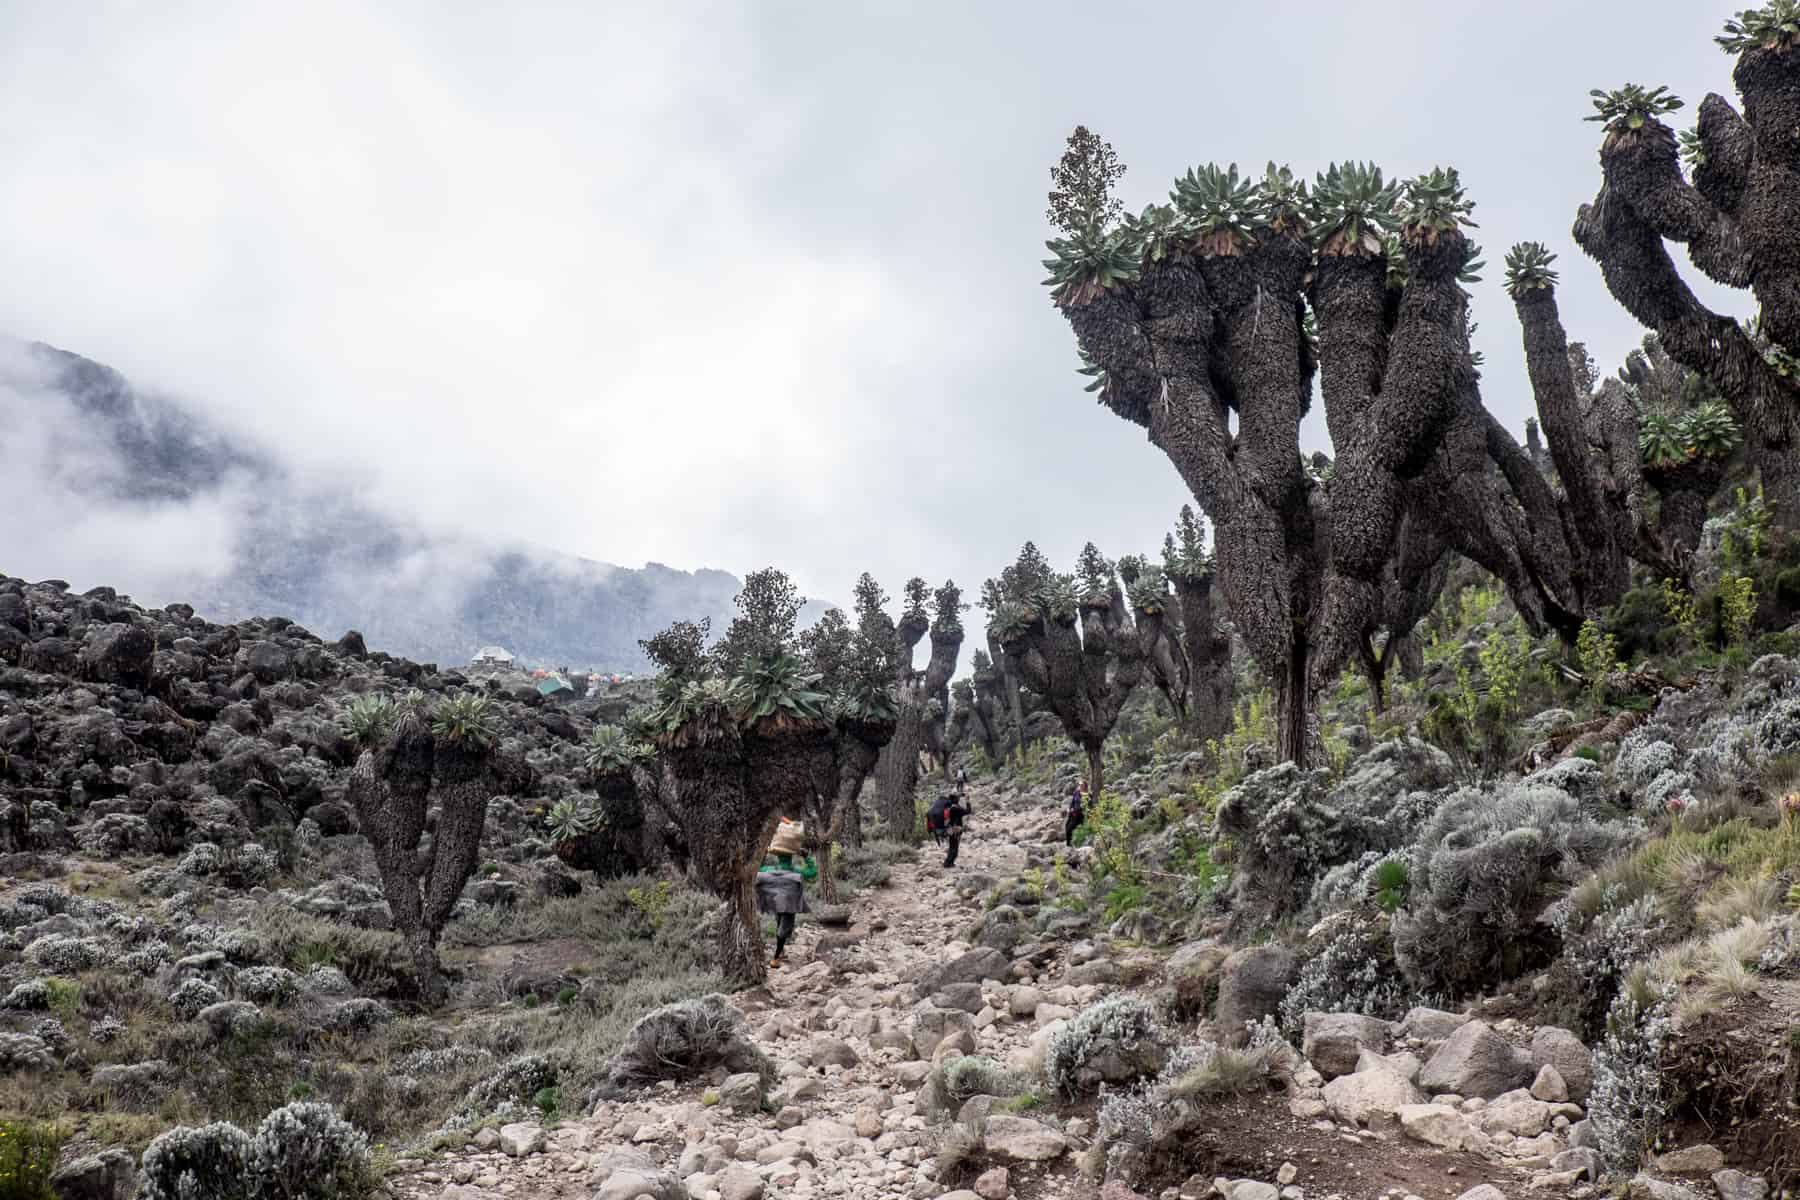 Three people walk on a light rocky pathway that cuts through a boulder-filled valley of Kilimanjaro lined with quirky, thick-trunked trees with foliage nests